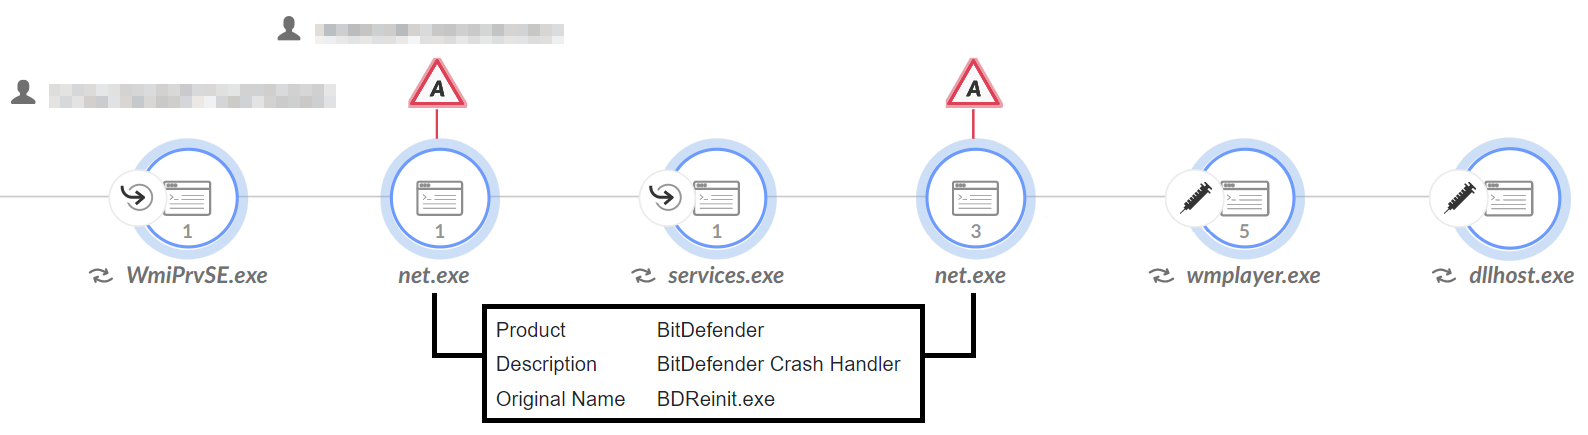 Image 10 is a screenshot of a diagram from Cortex XDR. The ShadowPad process tree shows the product (BitDefender), the description (BitDefender Crash Handler) and the original name (BDReinit.exe). Some information has been redacted.